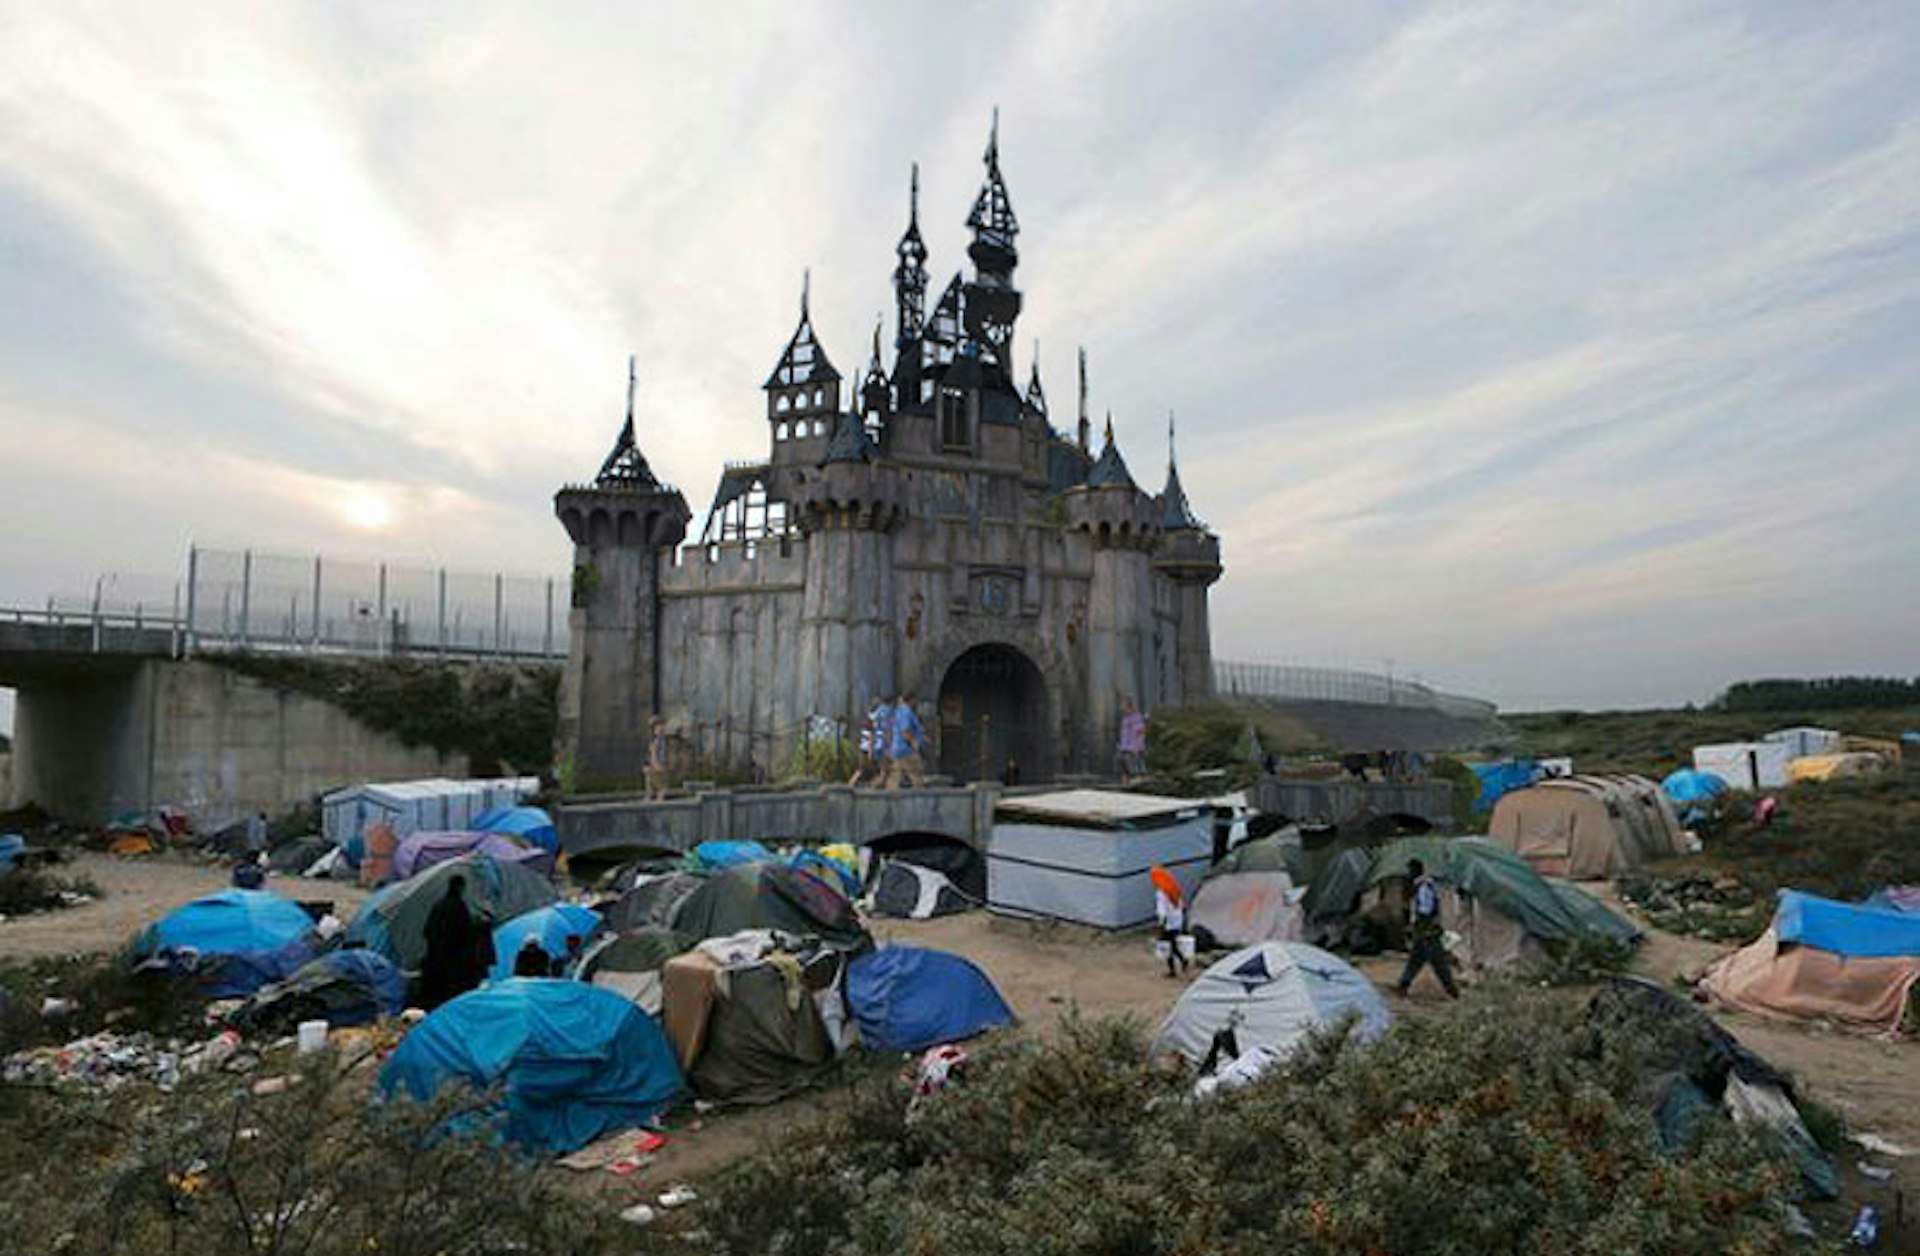 The image released by Banksy to announce his new plans for Dismaland.